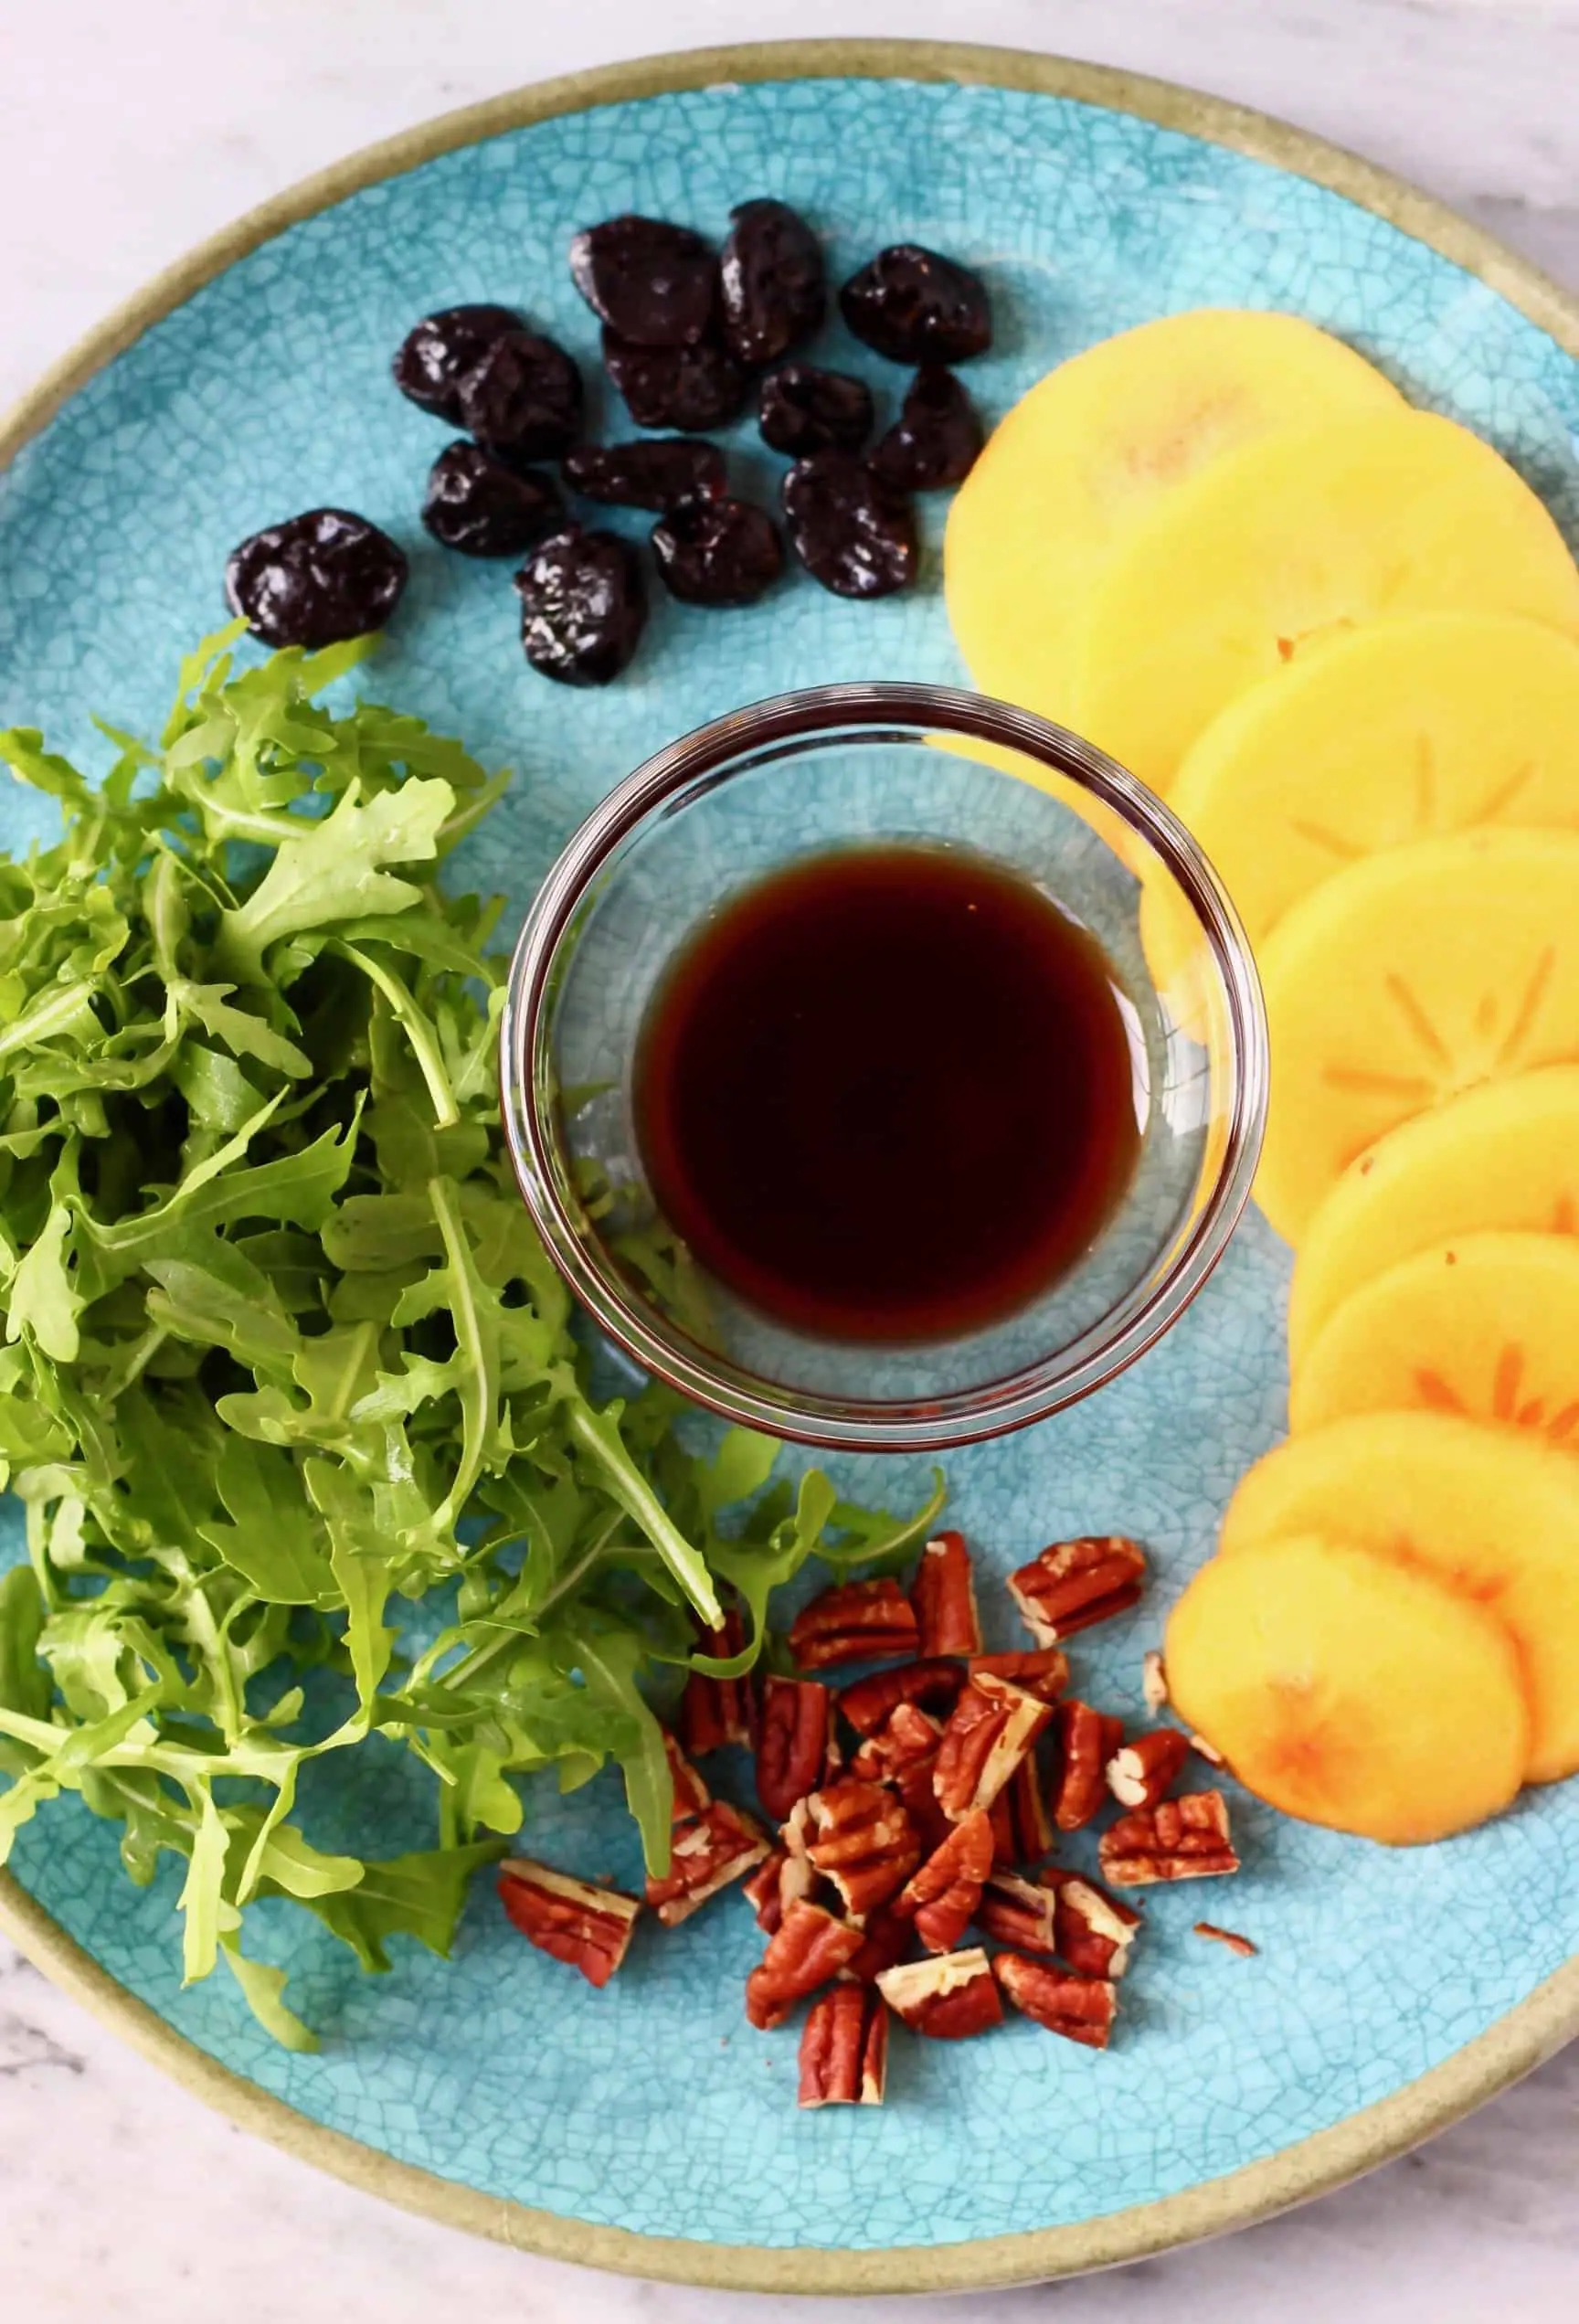 Persimmon slices, dried cherries, rocket, chopped pecan nuts and a brown dressing in a bowl on a plate